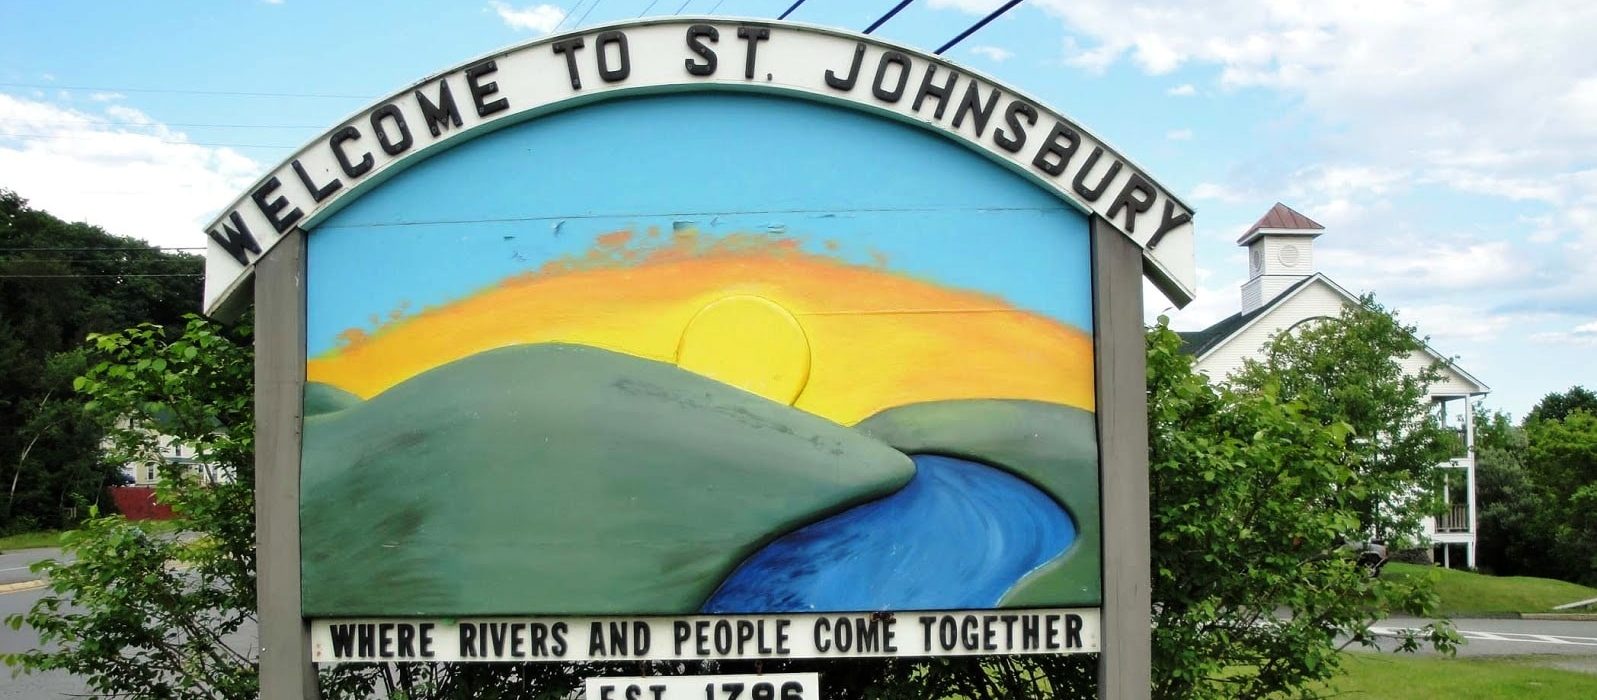 welcome sign in St. Johnsbury Vermont|man standing on the Three Rivers Bike path St. Johnsbury VT near Rabbit Hill Inn|welcome sign in St. Johnsbury Vermont|welcome sign at St. Johnsbury Vermont